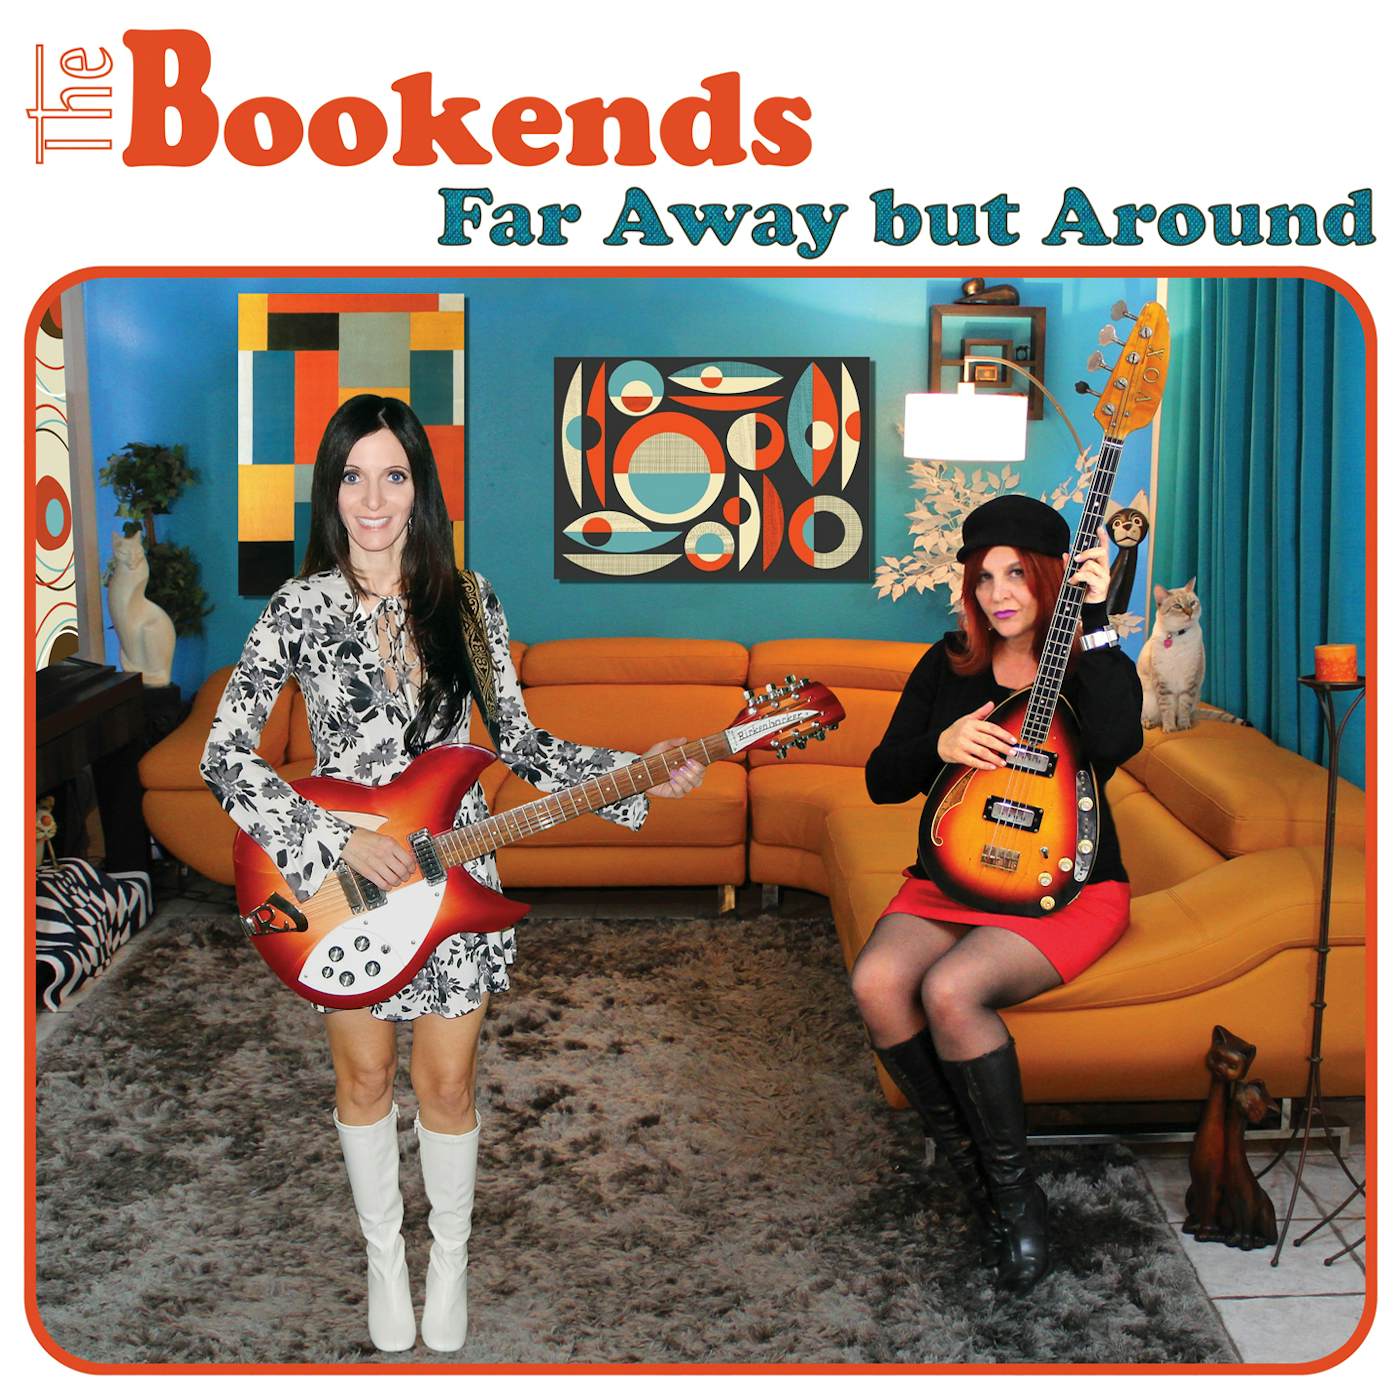 Bookends FAR AWAY BUT AROUND Vinyl Record